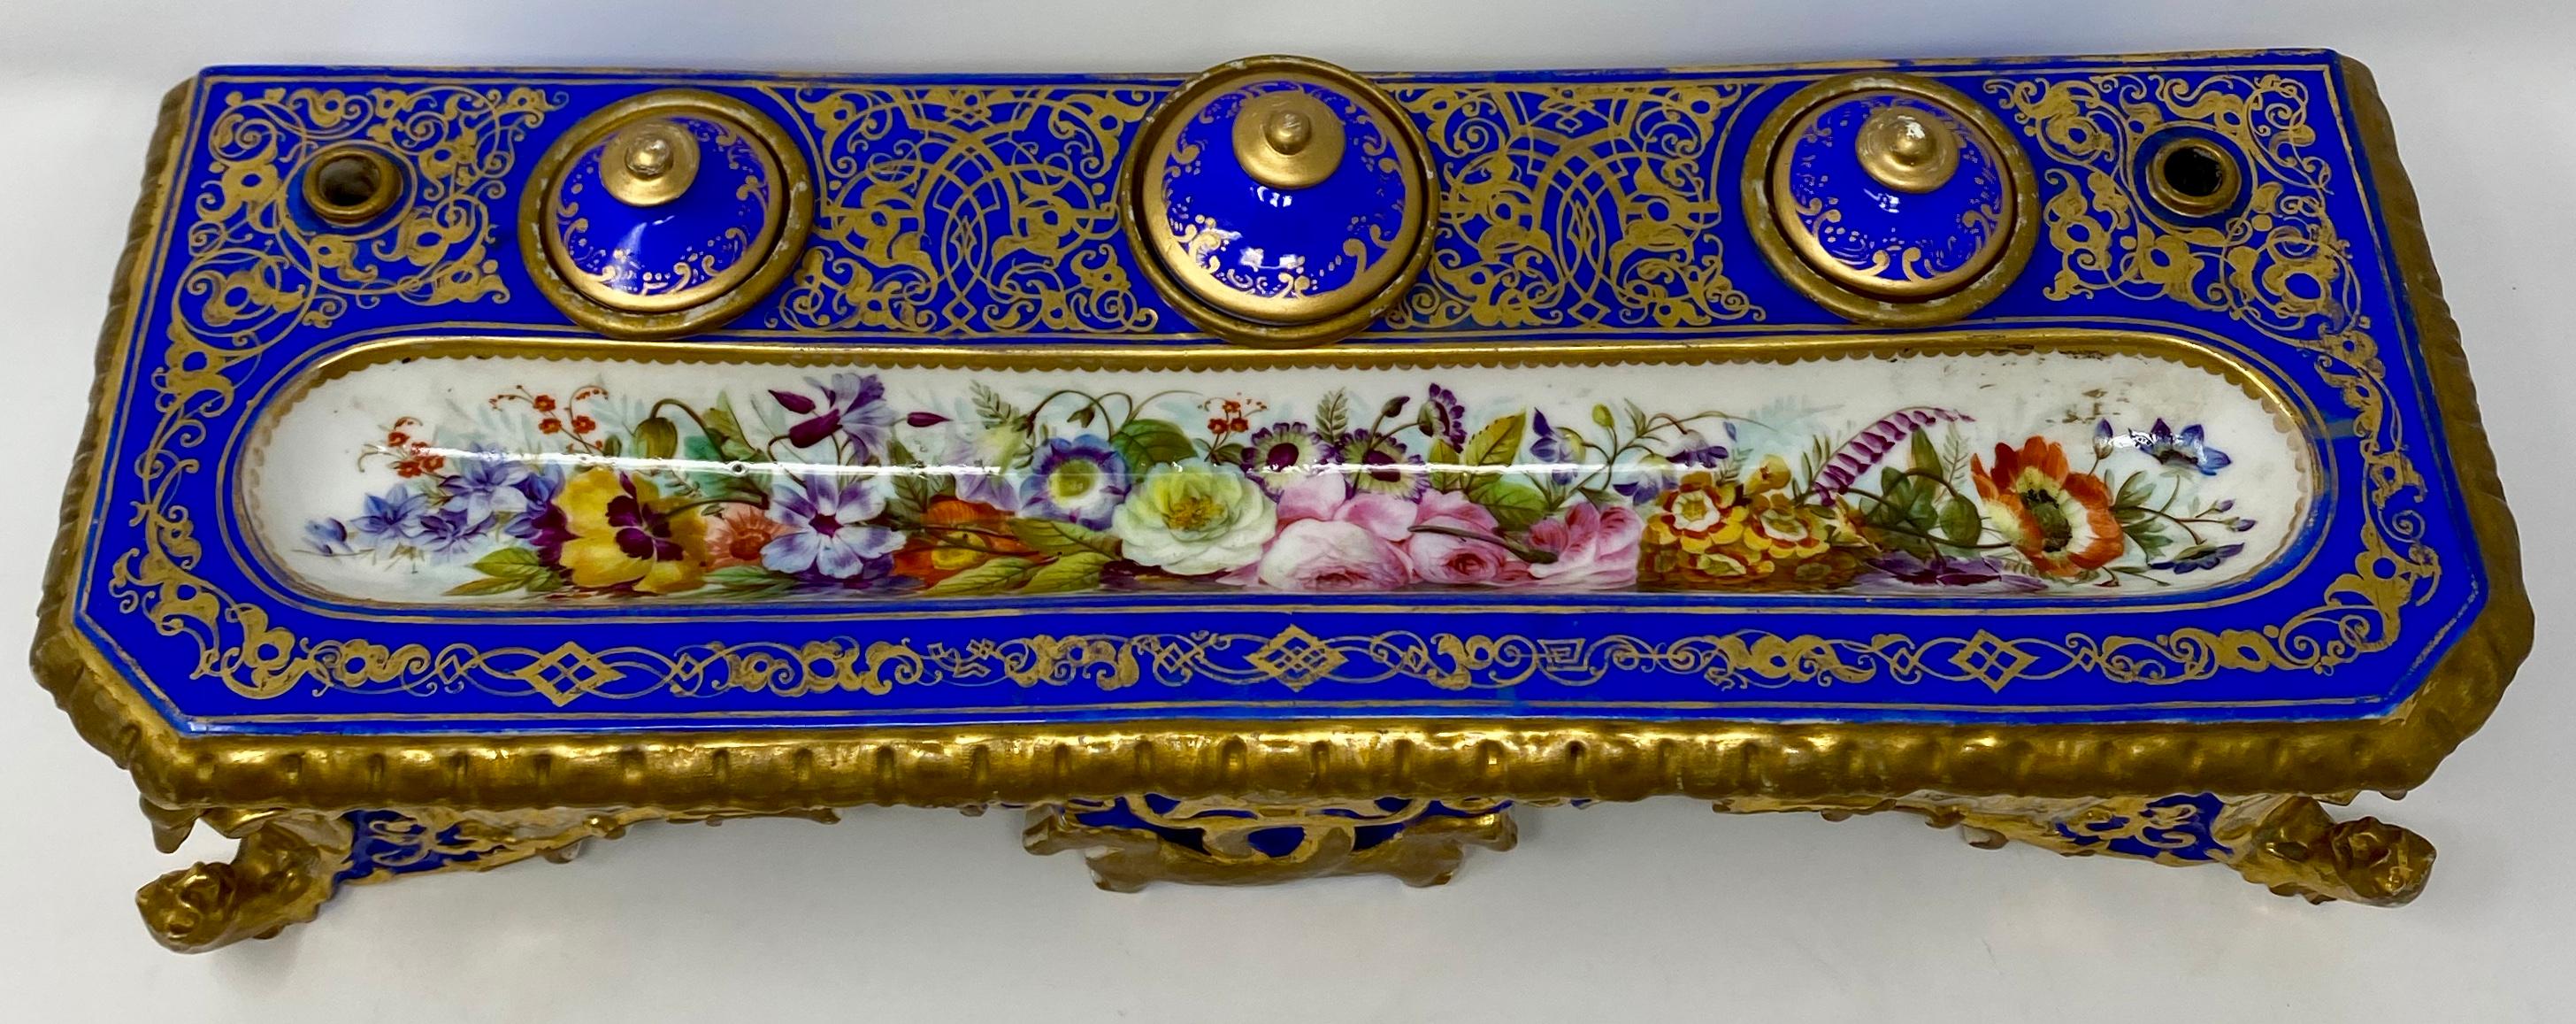 Jacob Petit (1796-1868) was first a porcelain painter in the Sevres factory and then opened his own shop, where decorative porcelain was made and painted such as the inkwell shown here.